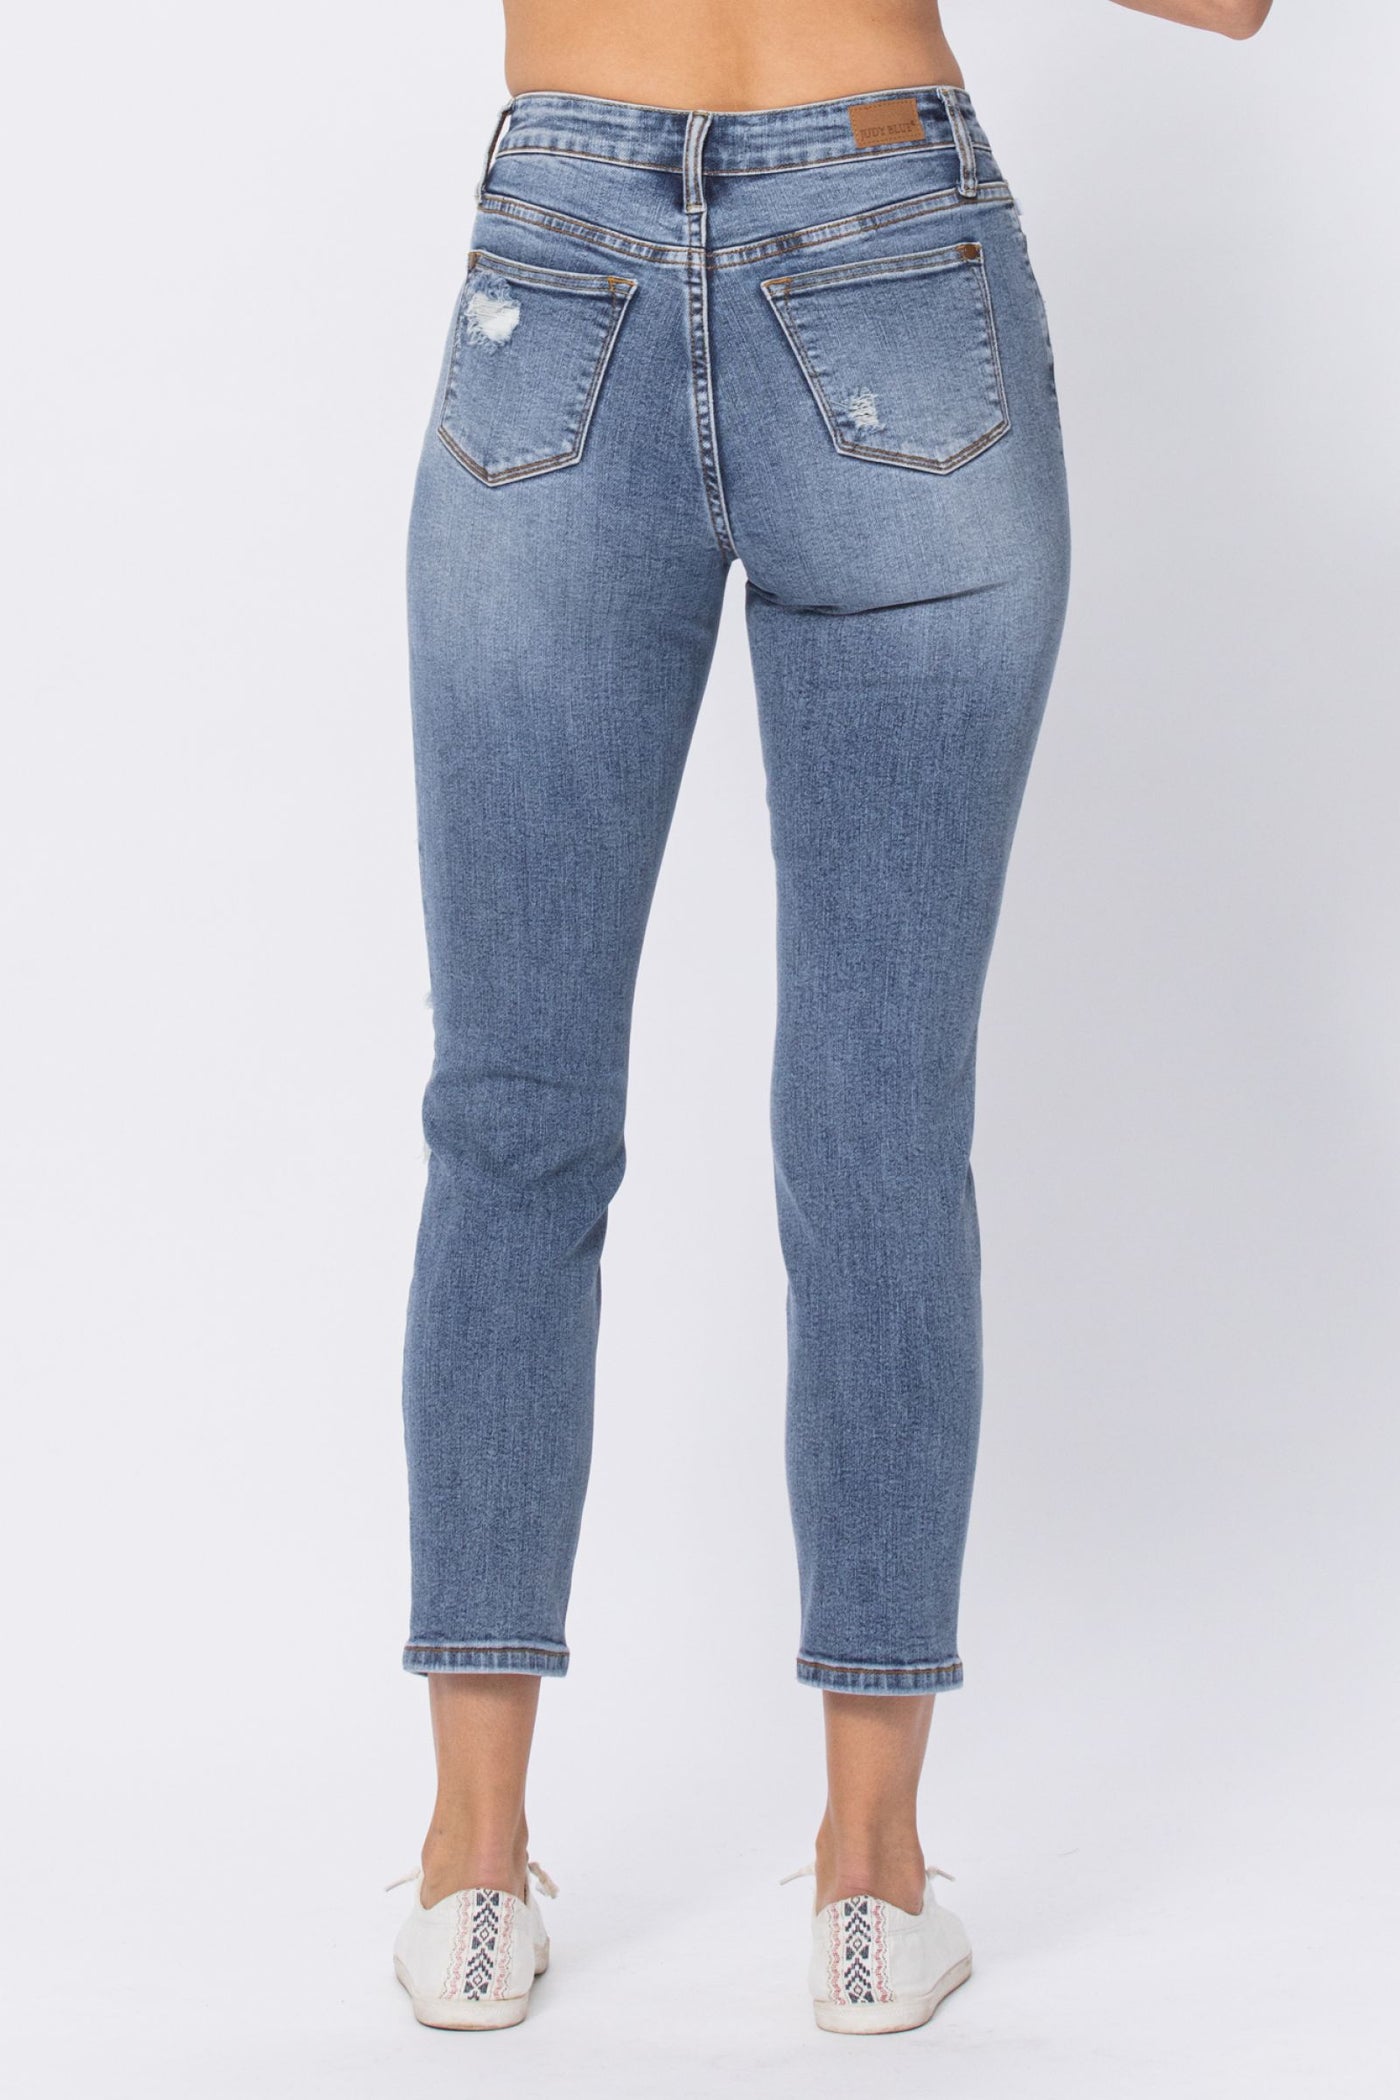 Judy Blue HIGH RISE DESTROYED SLIM FIT